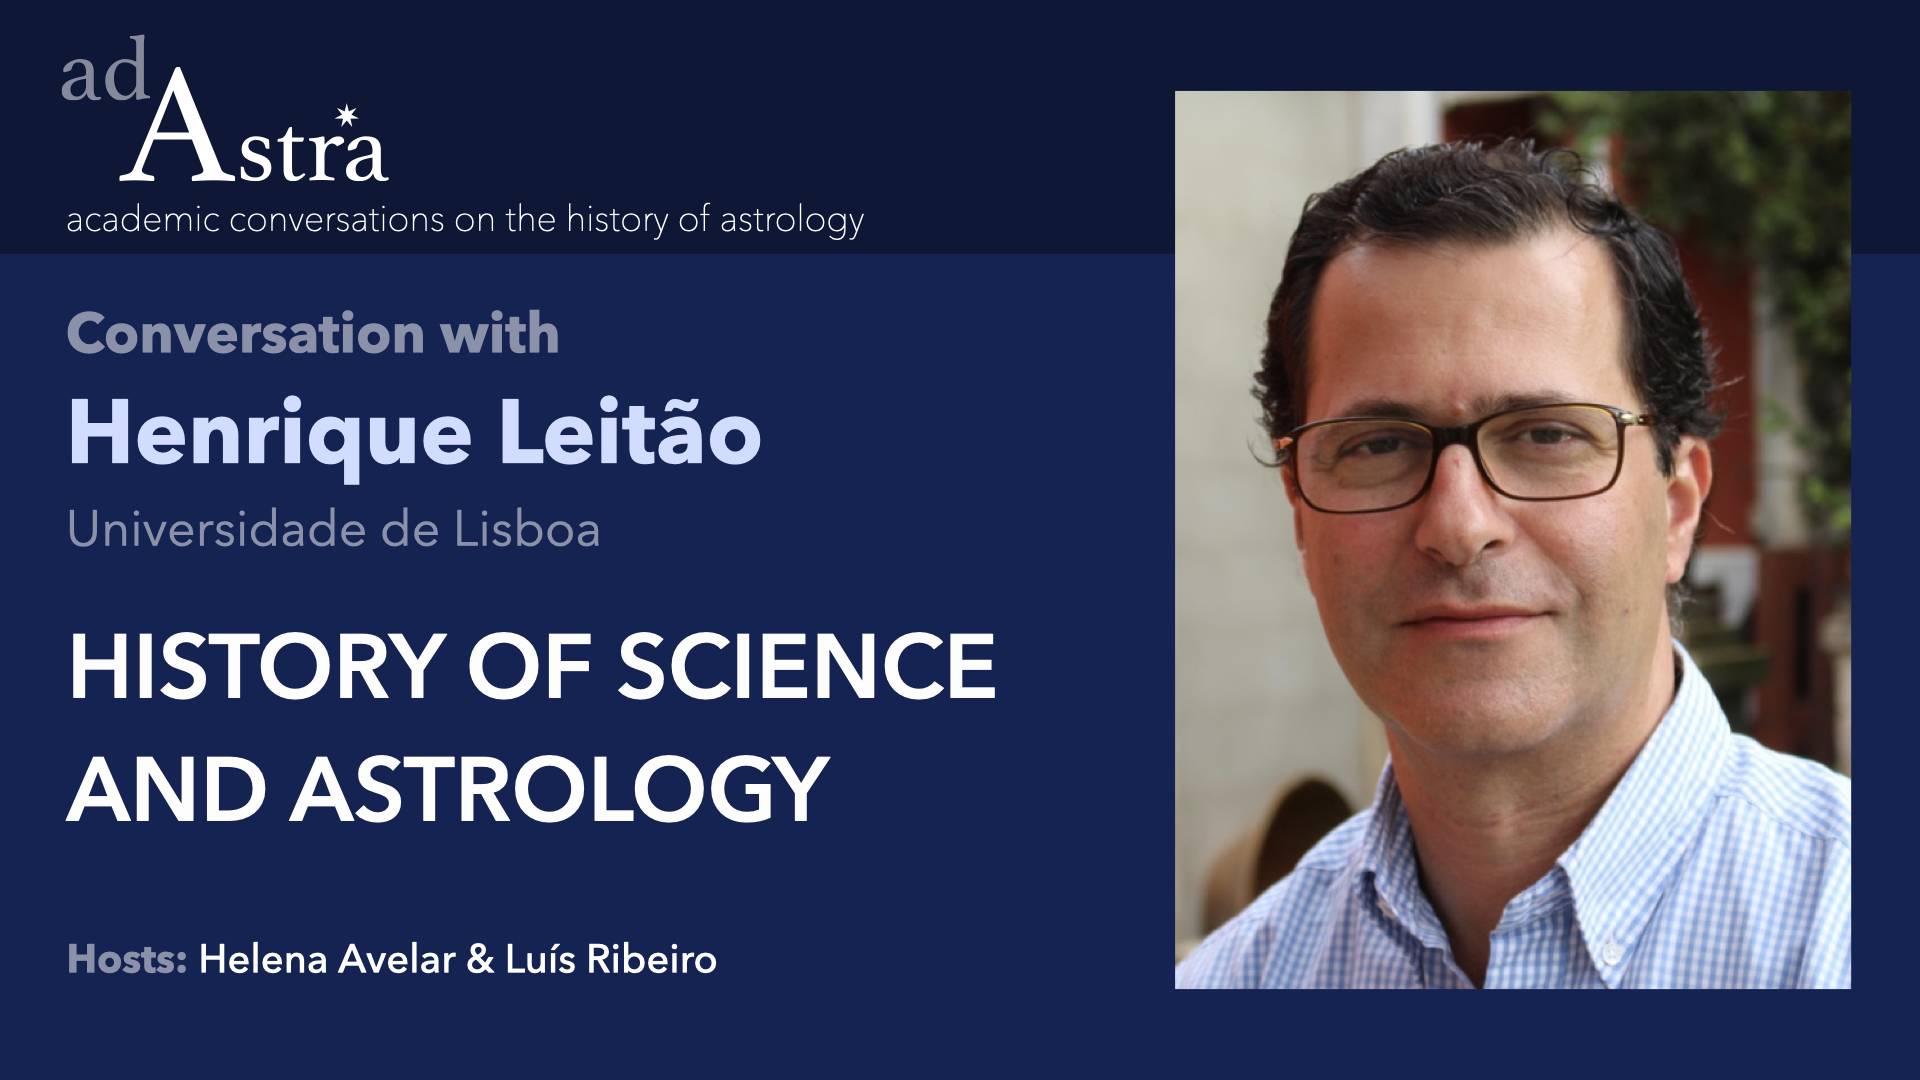 History of Science and Astrology with Henrique Leitão